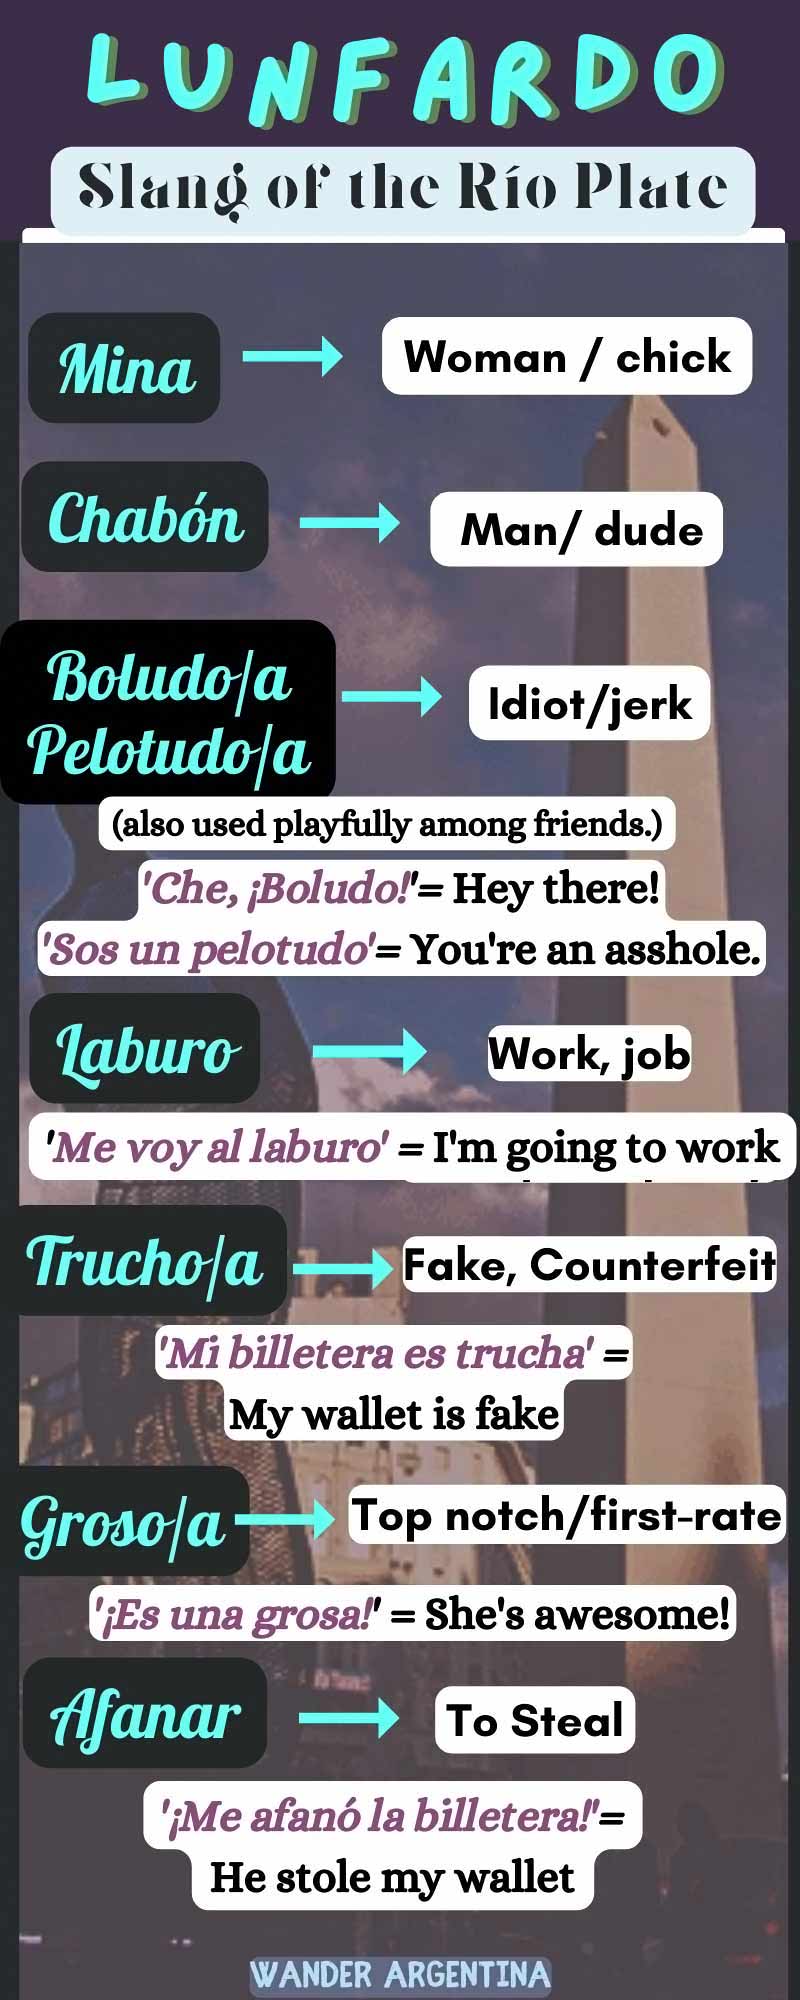 Lunfardo -slang of the River Plate, Common words infograph